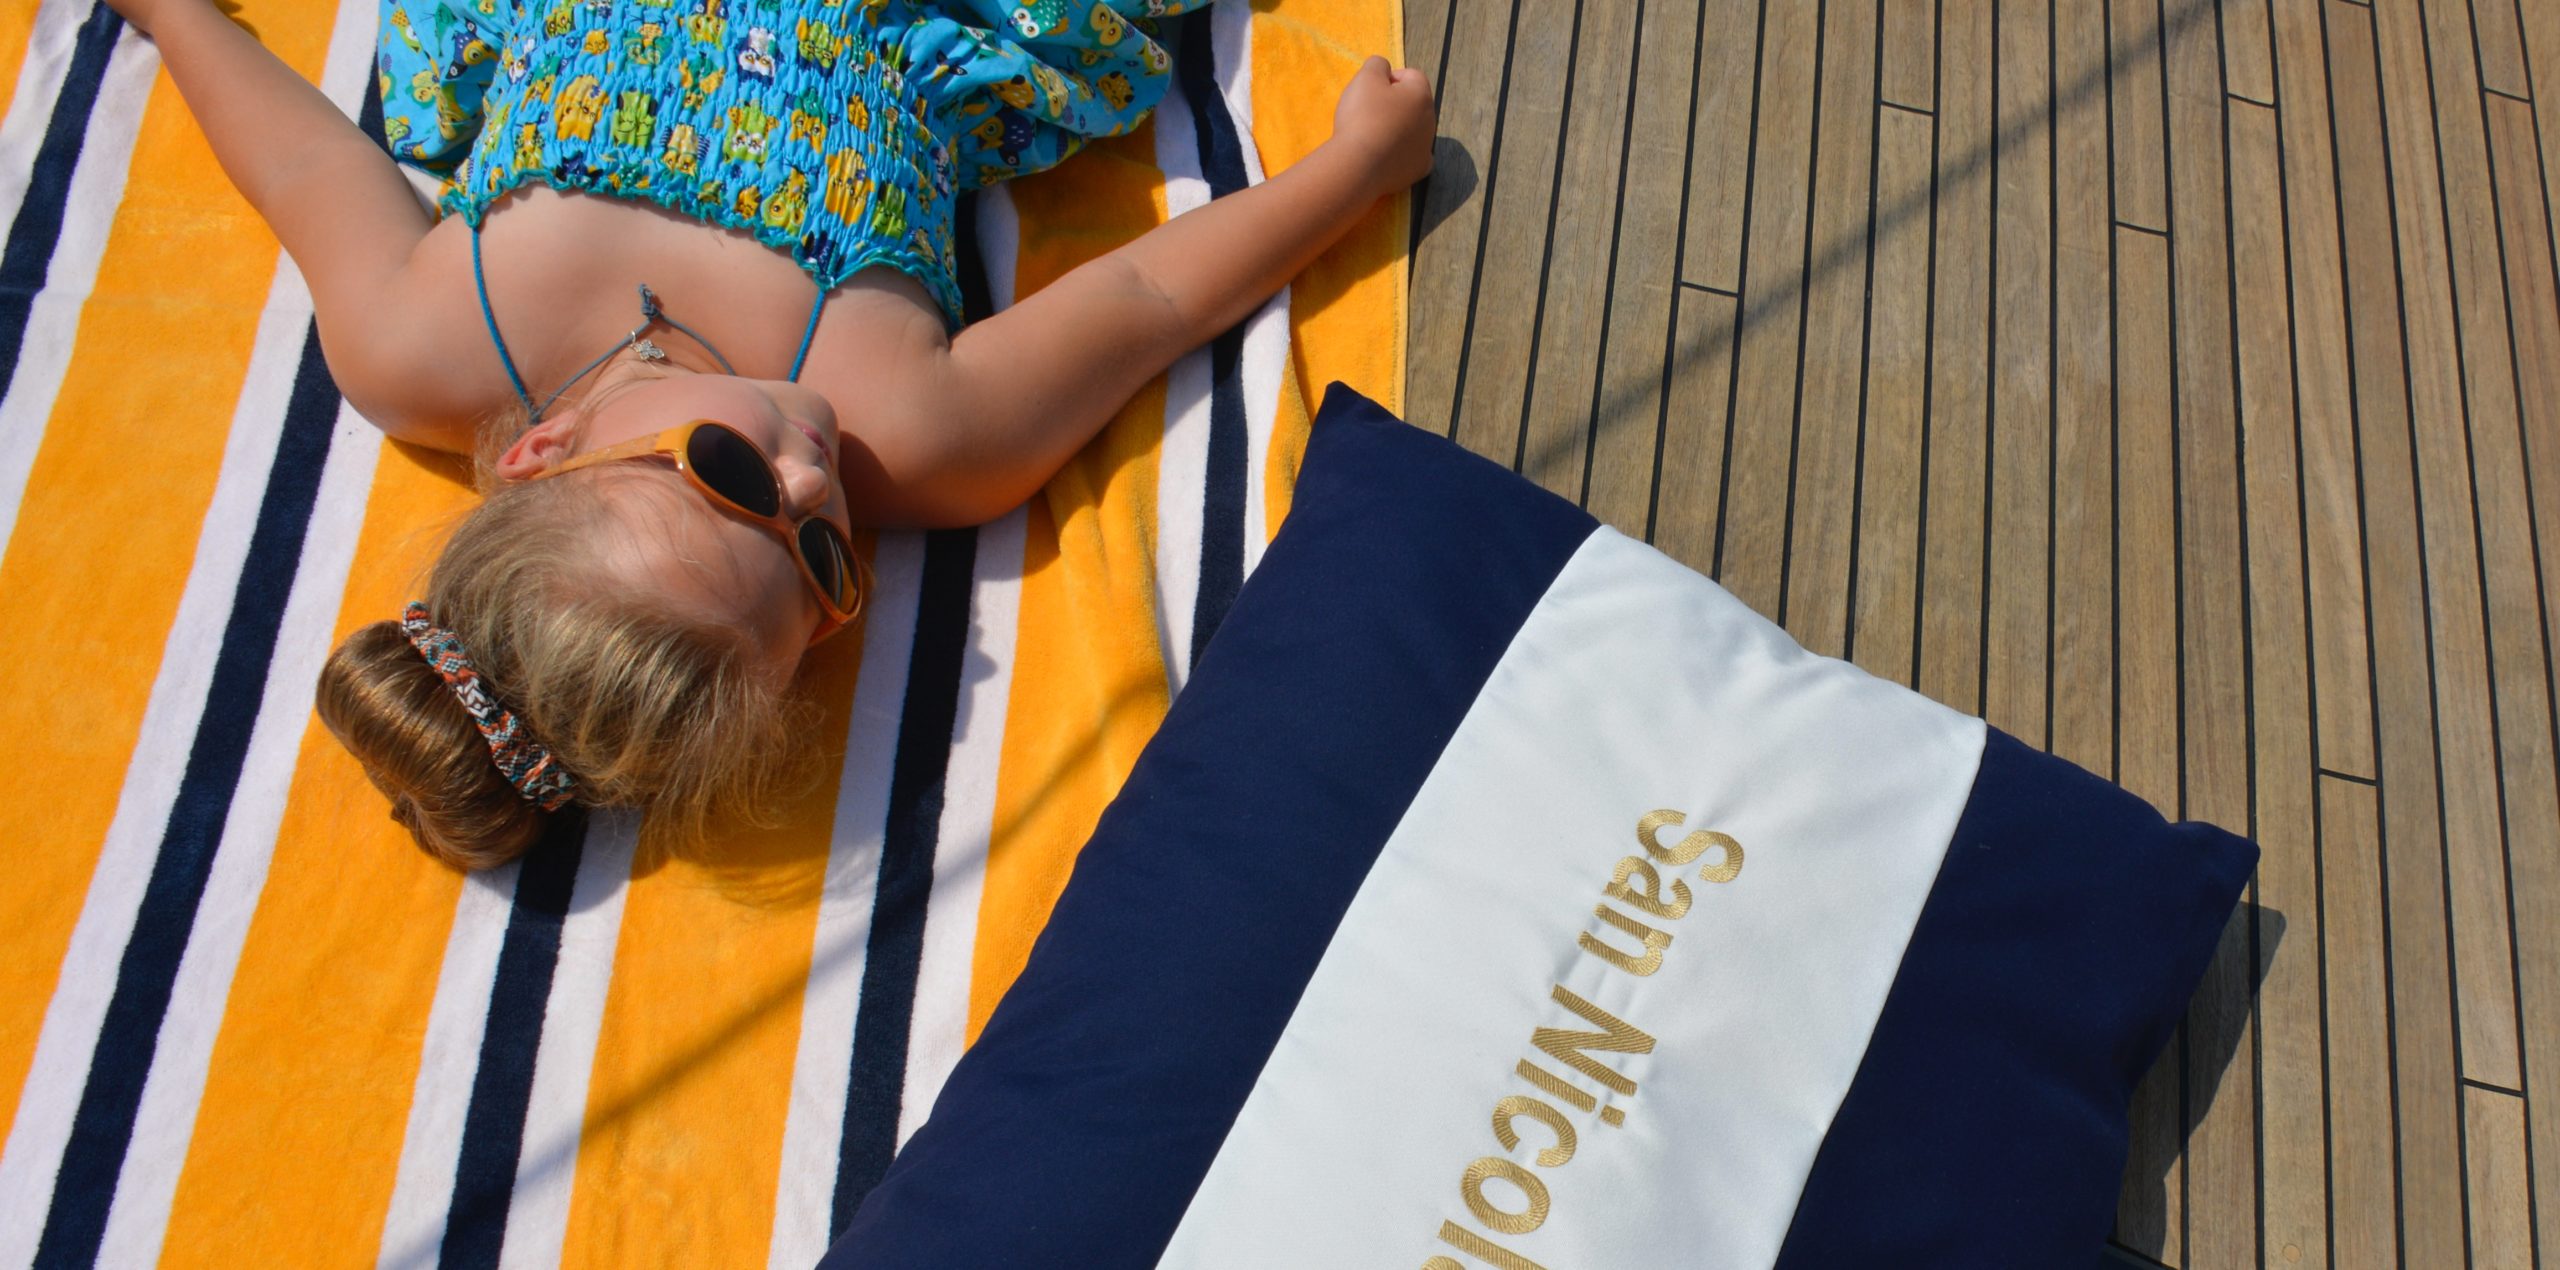 Embroidered Frey Luxury Pillows with yacht name San Nicola. A perfect yacht decor for a child's nap after a swim or sailing.